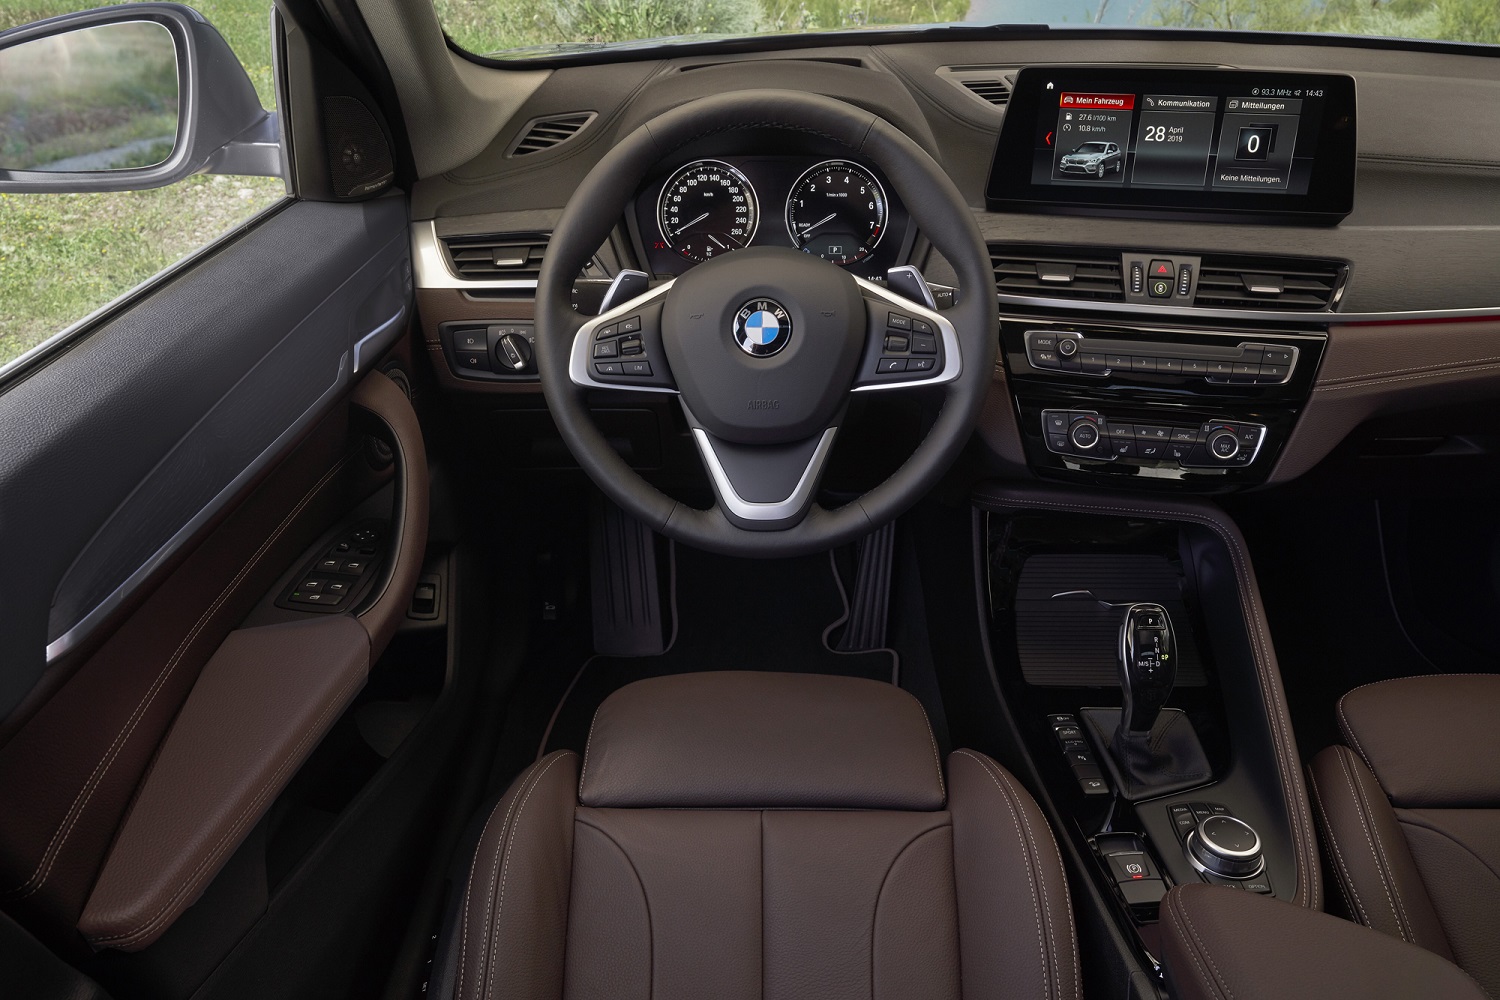 2020 bmw x1 gets new look front end interior upgrades official 7